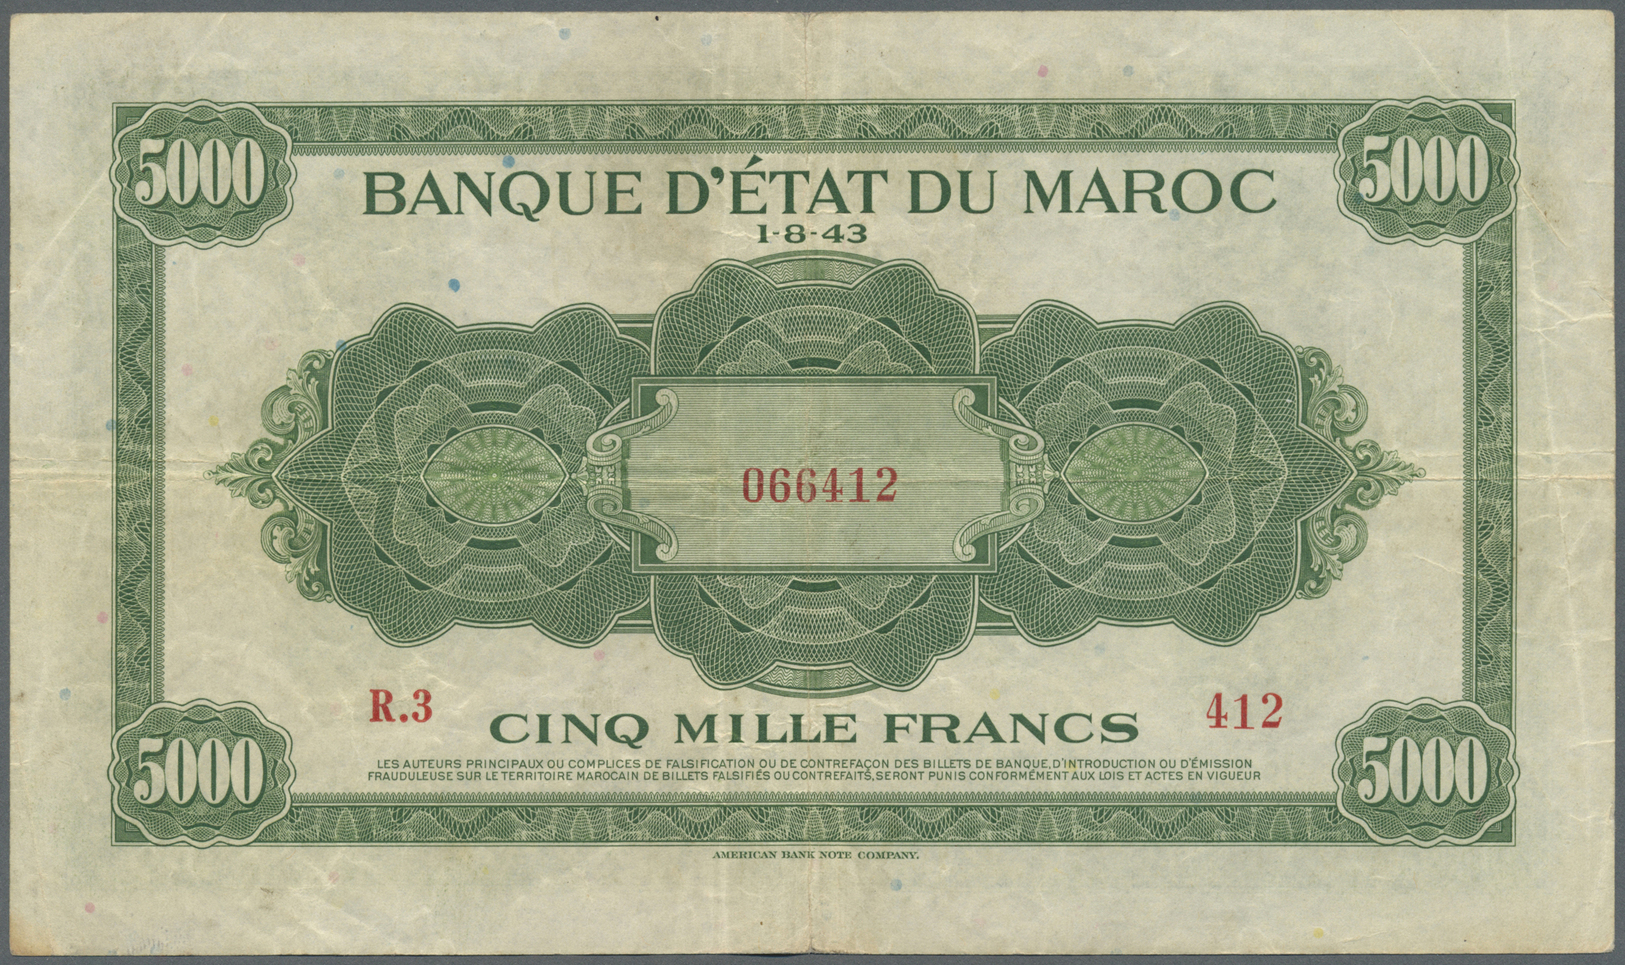 01752 Morocco / Marokko: 5000 Francs 1943 P. 32 In Normal Used Condition With Several Folds And Creases, But No Holes Or - Morocco